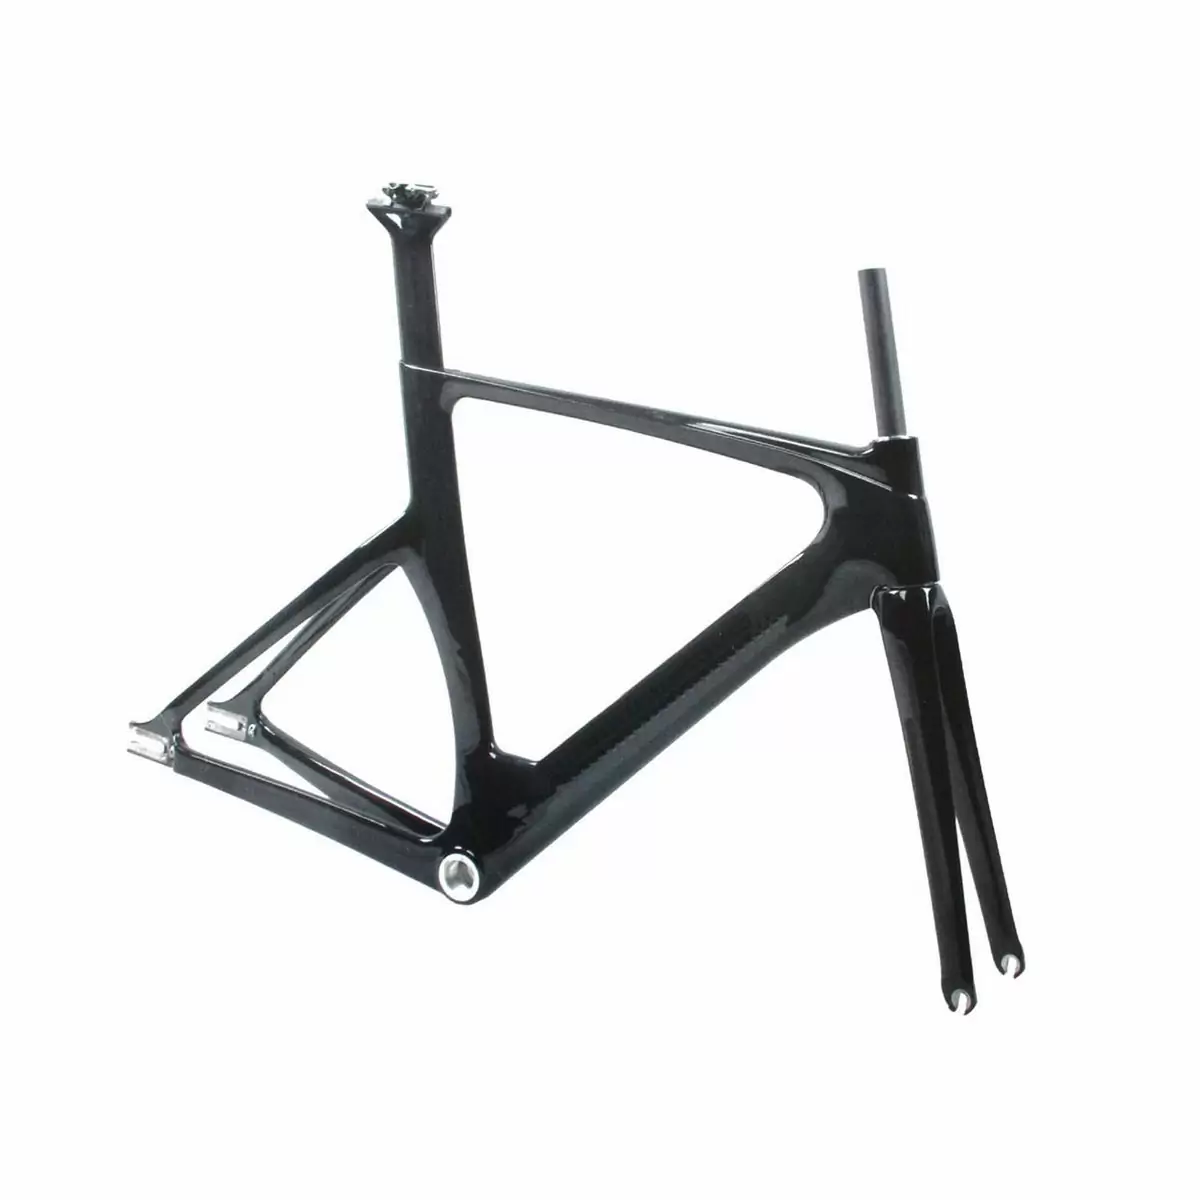 Cadre Track / Pista full carbon BSA taille 52 - image